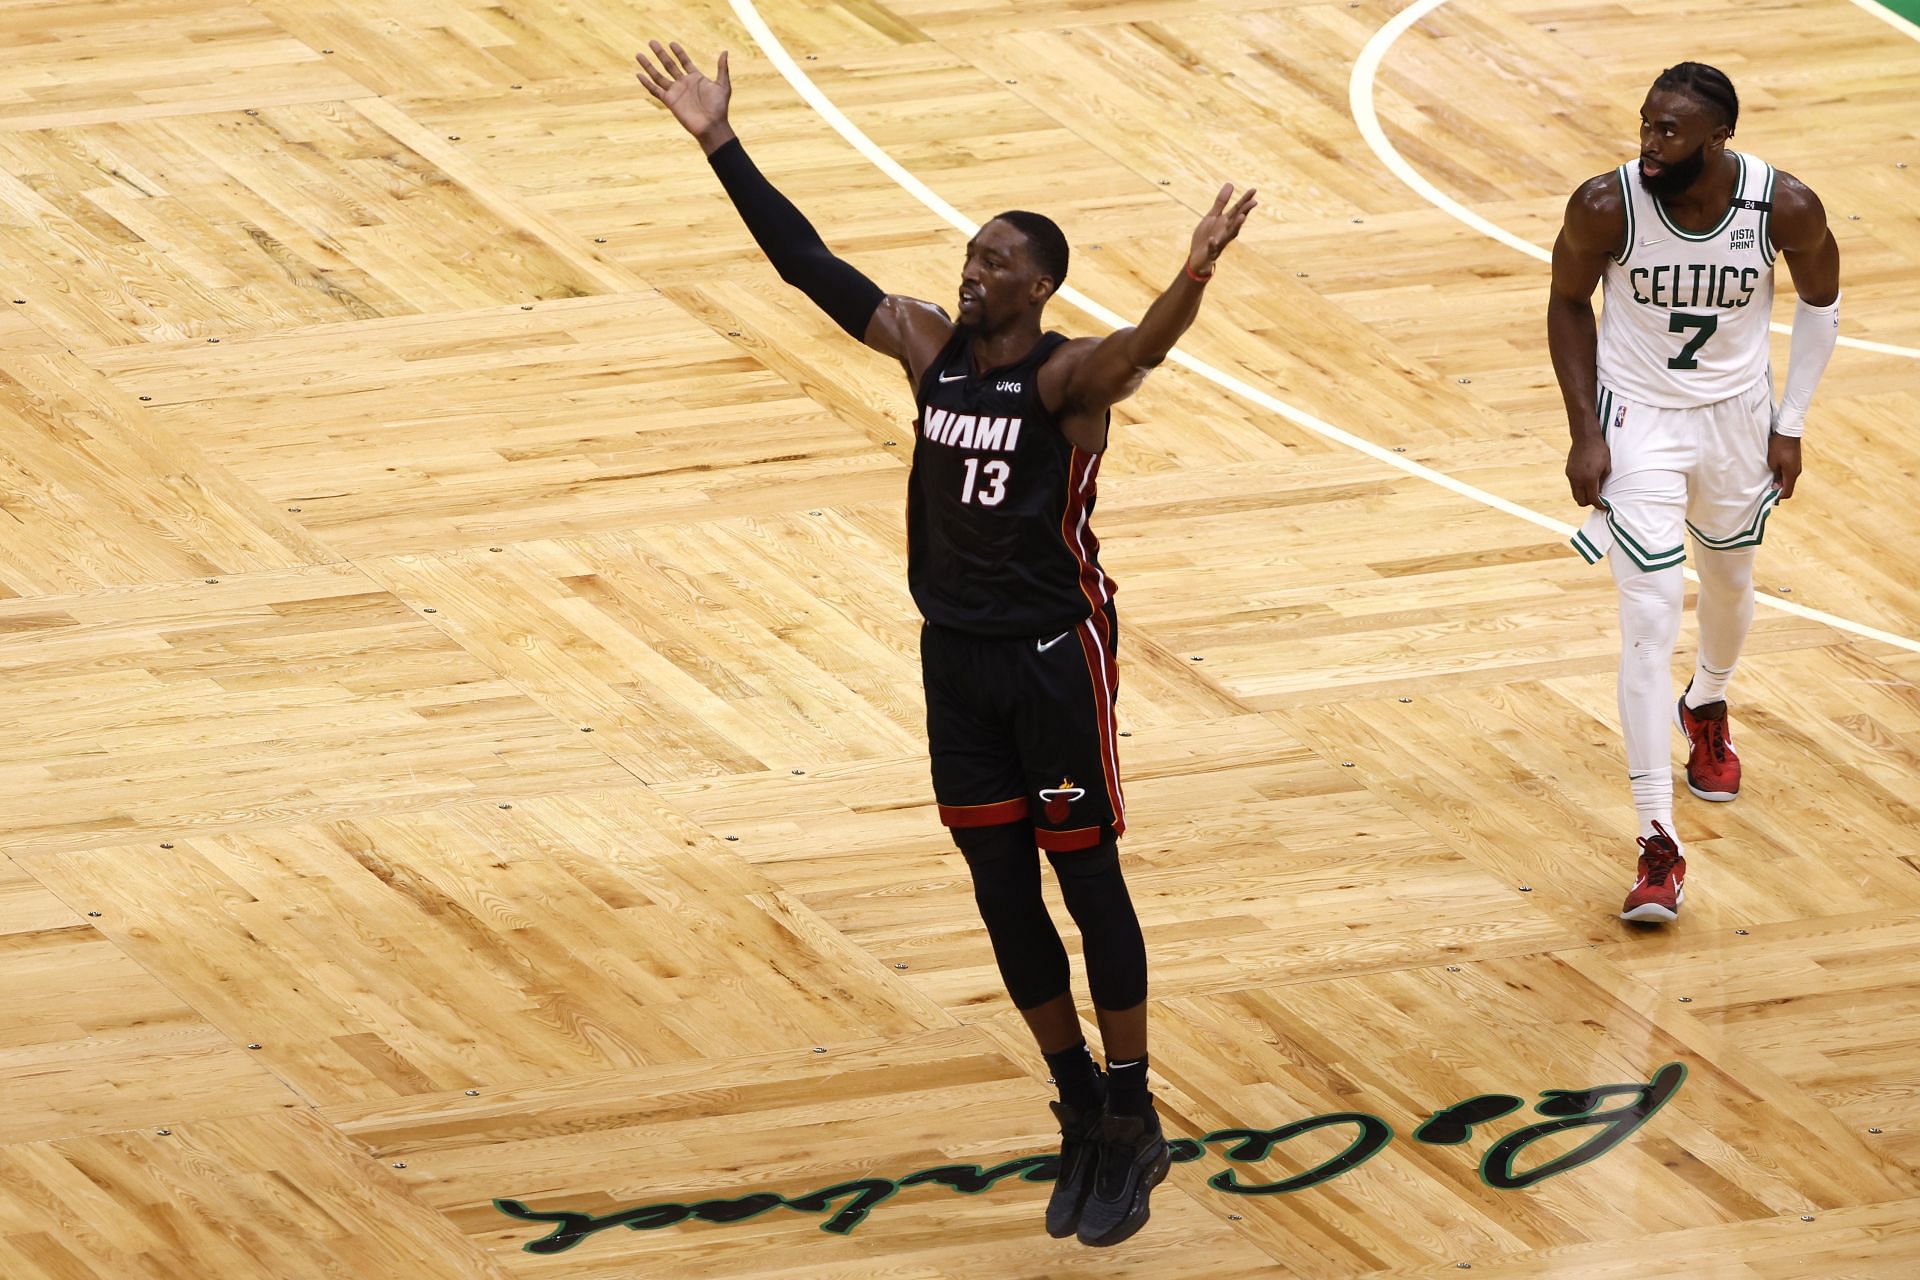 Bam Adebayo put up his best performance of the playoffs in Game Three